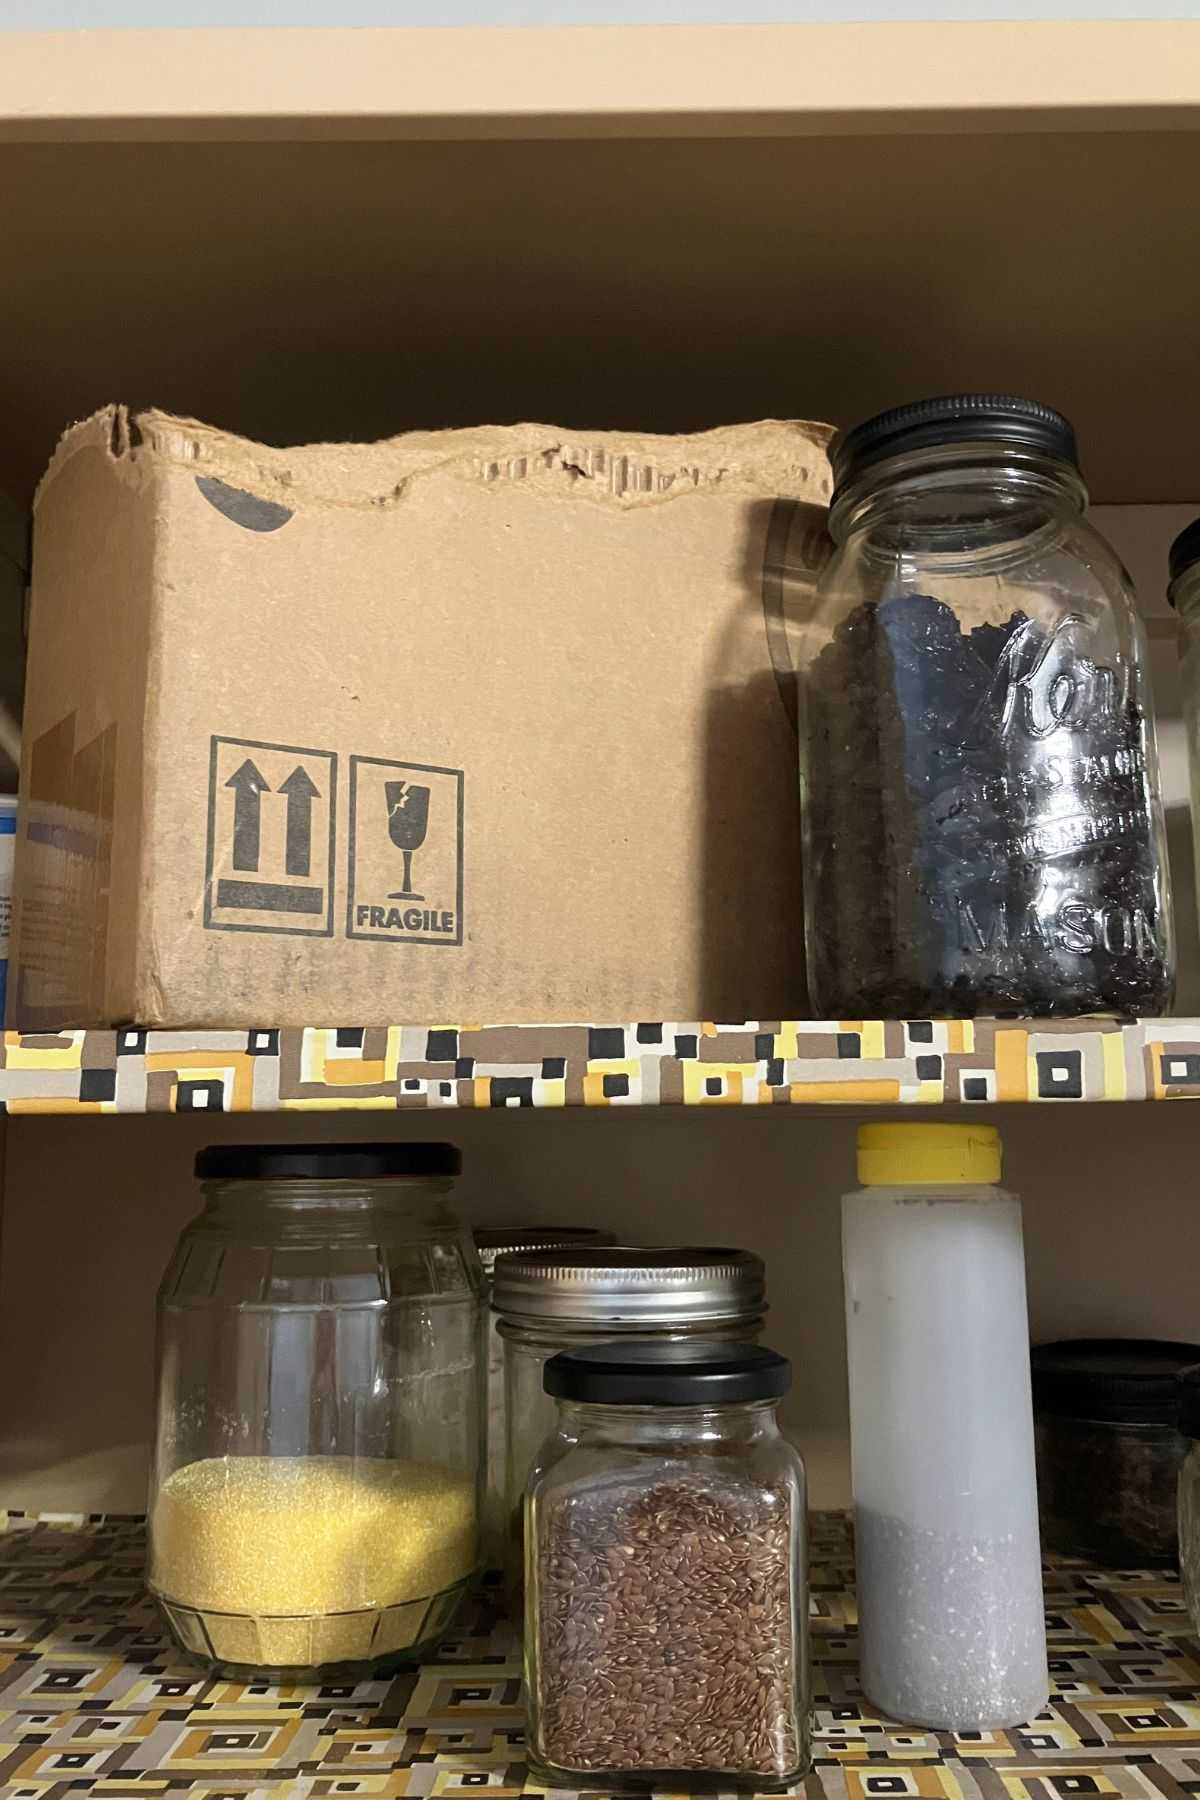 cardboard box and jars of pantry ingredients on two shelves